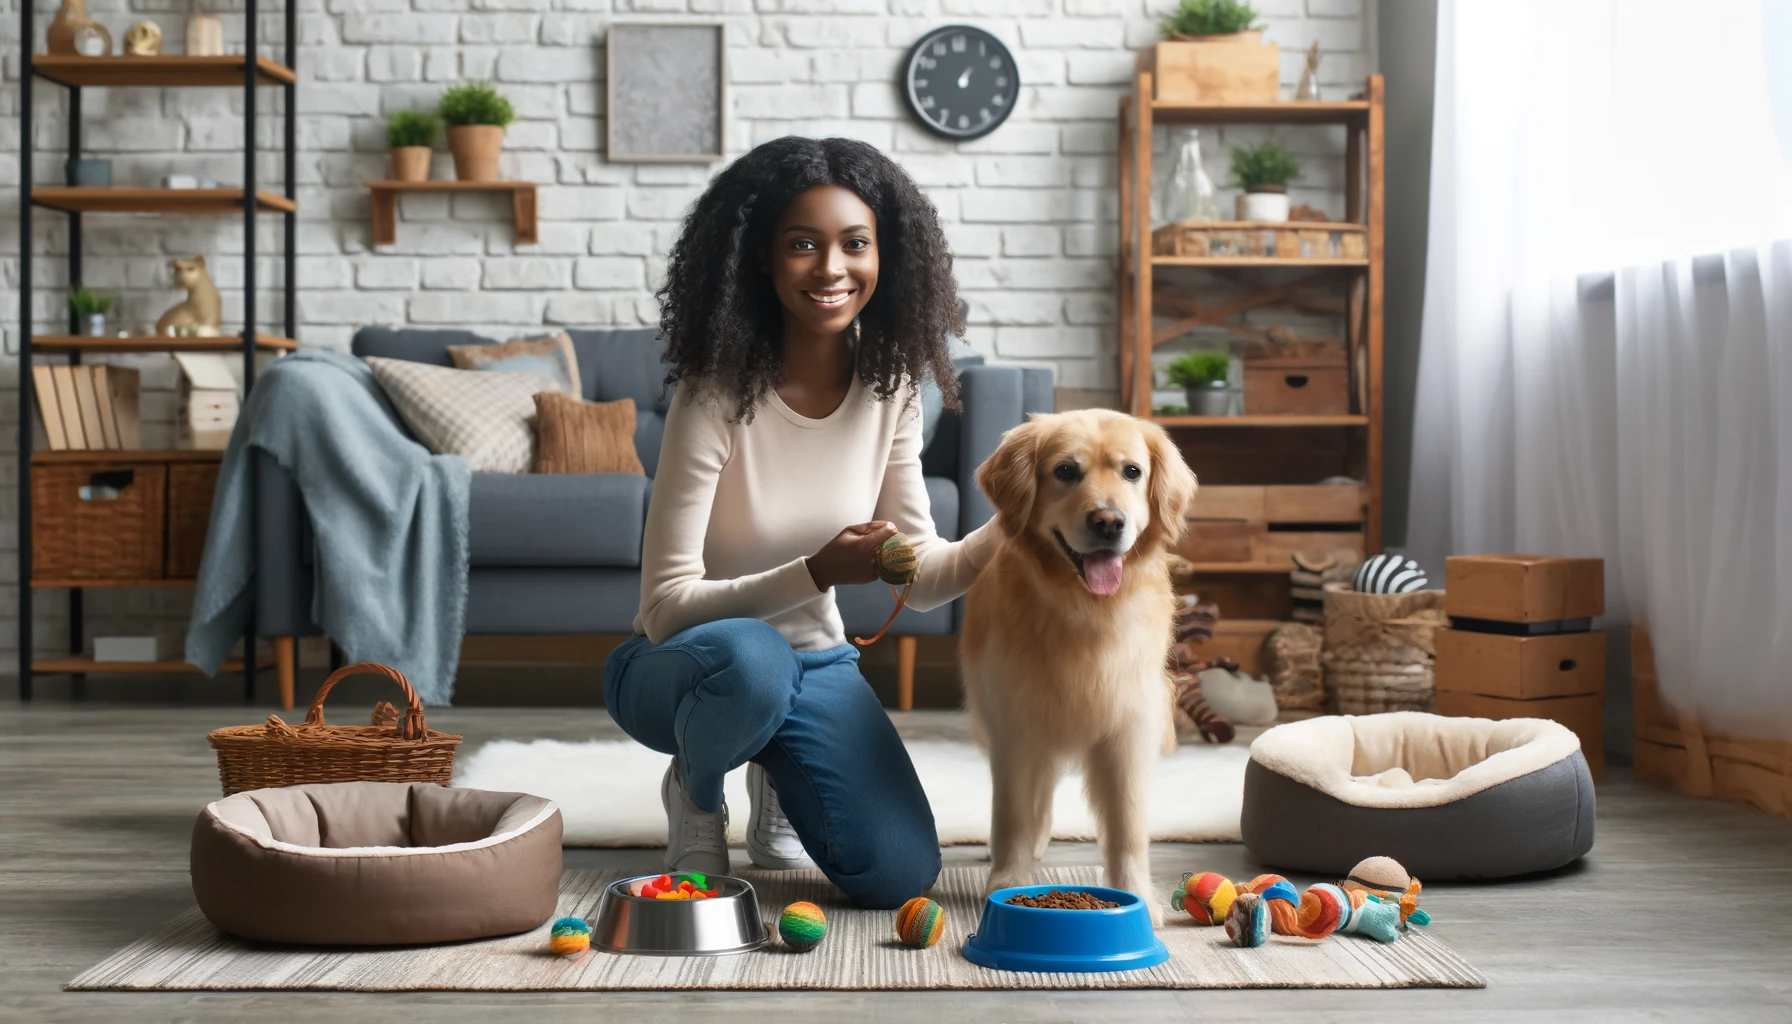 A realistic photograph of a black woman taking care of a dog at home. The setting includes a cozy living room with pet toys, a dog bed, and food bowls. The woman is smiling and playing with the dog, creating a warm and friendly atmosphere.